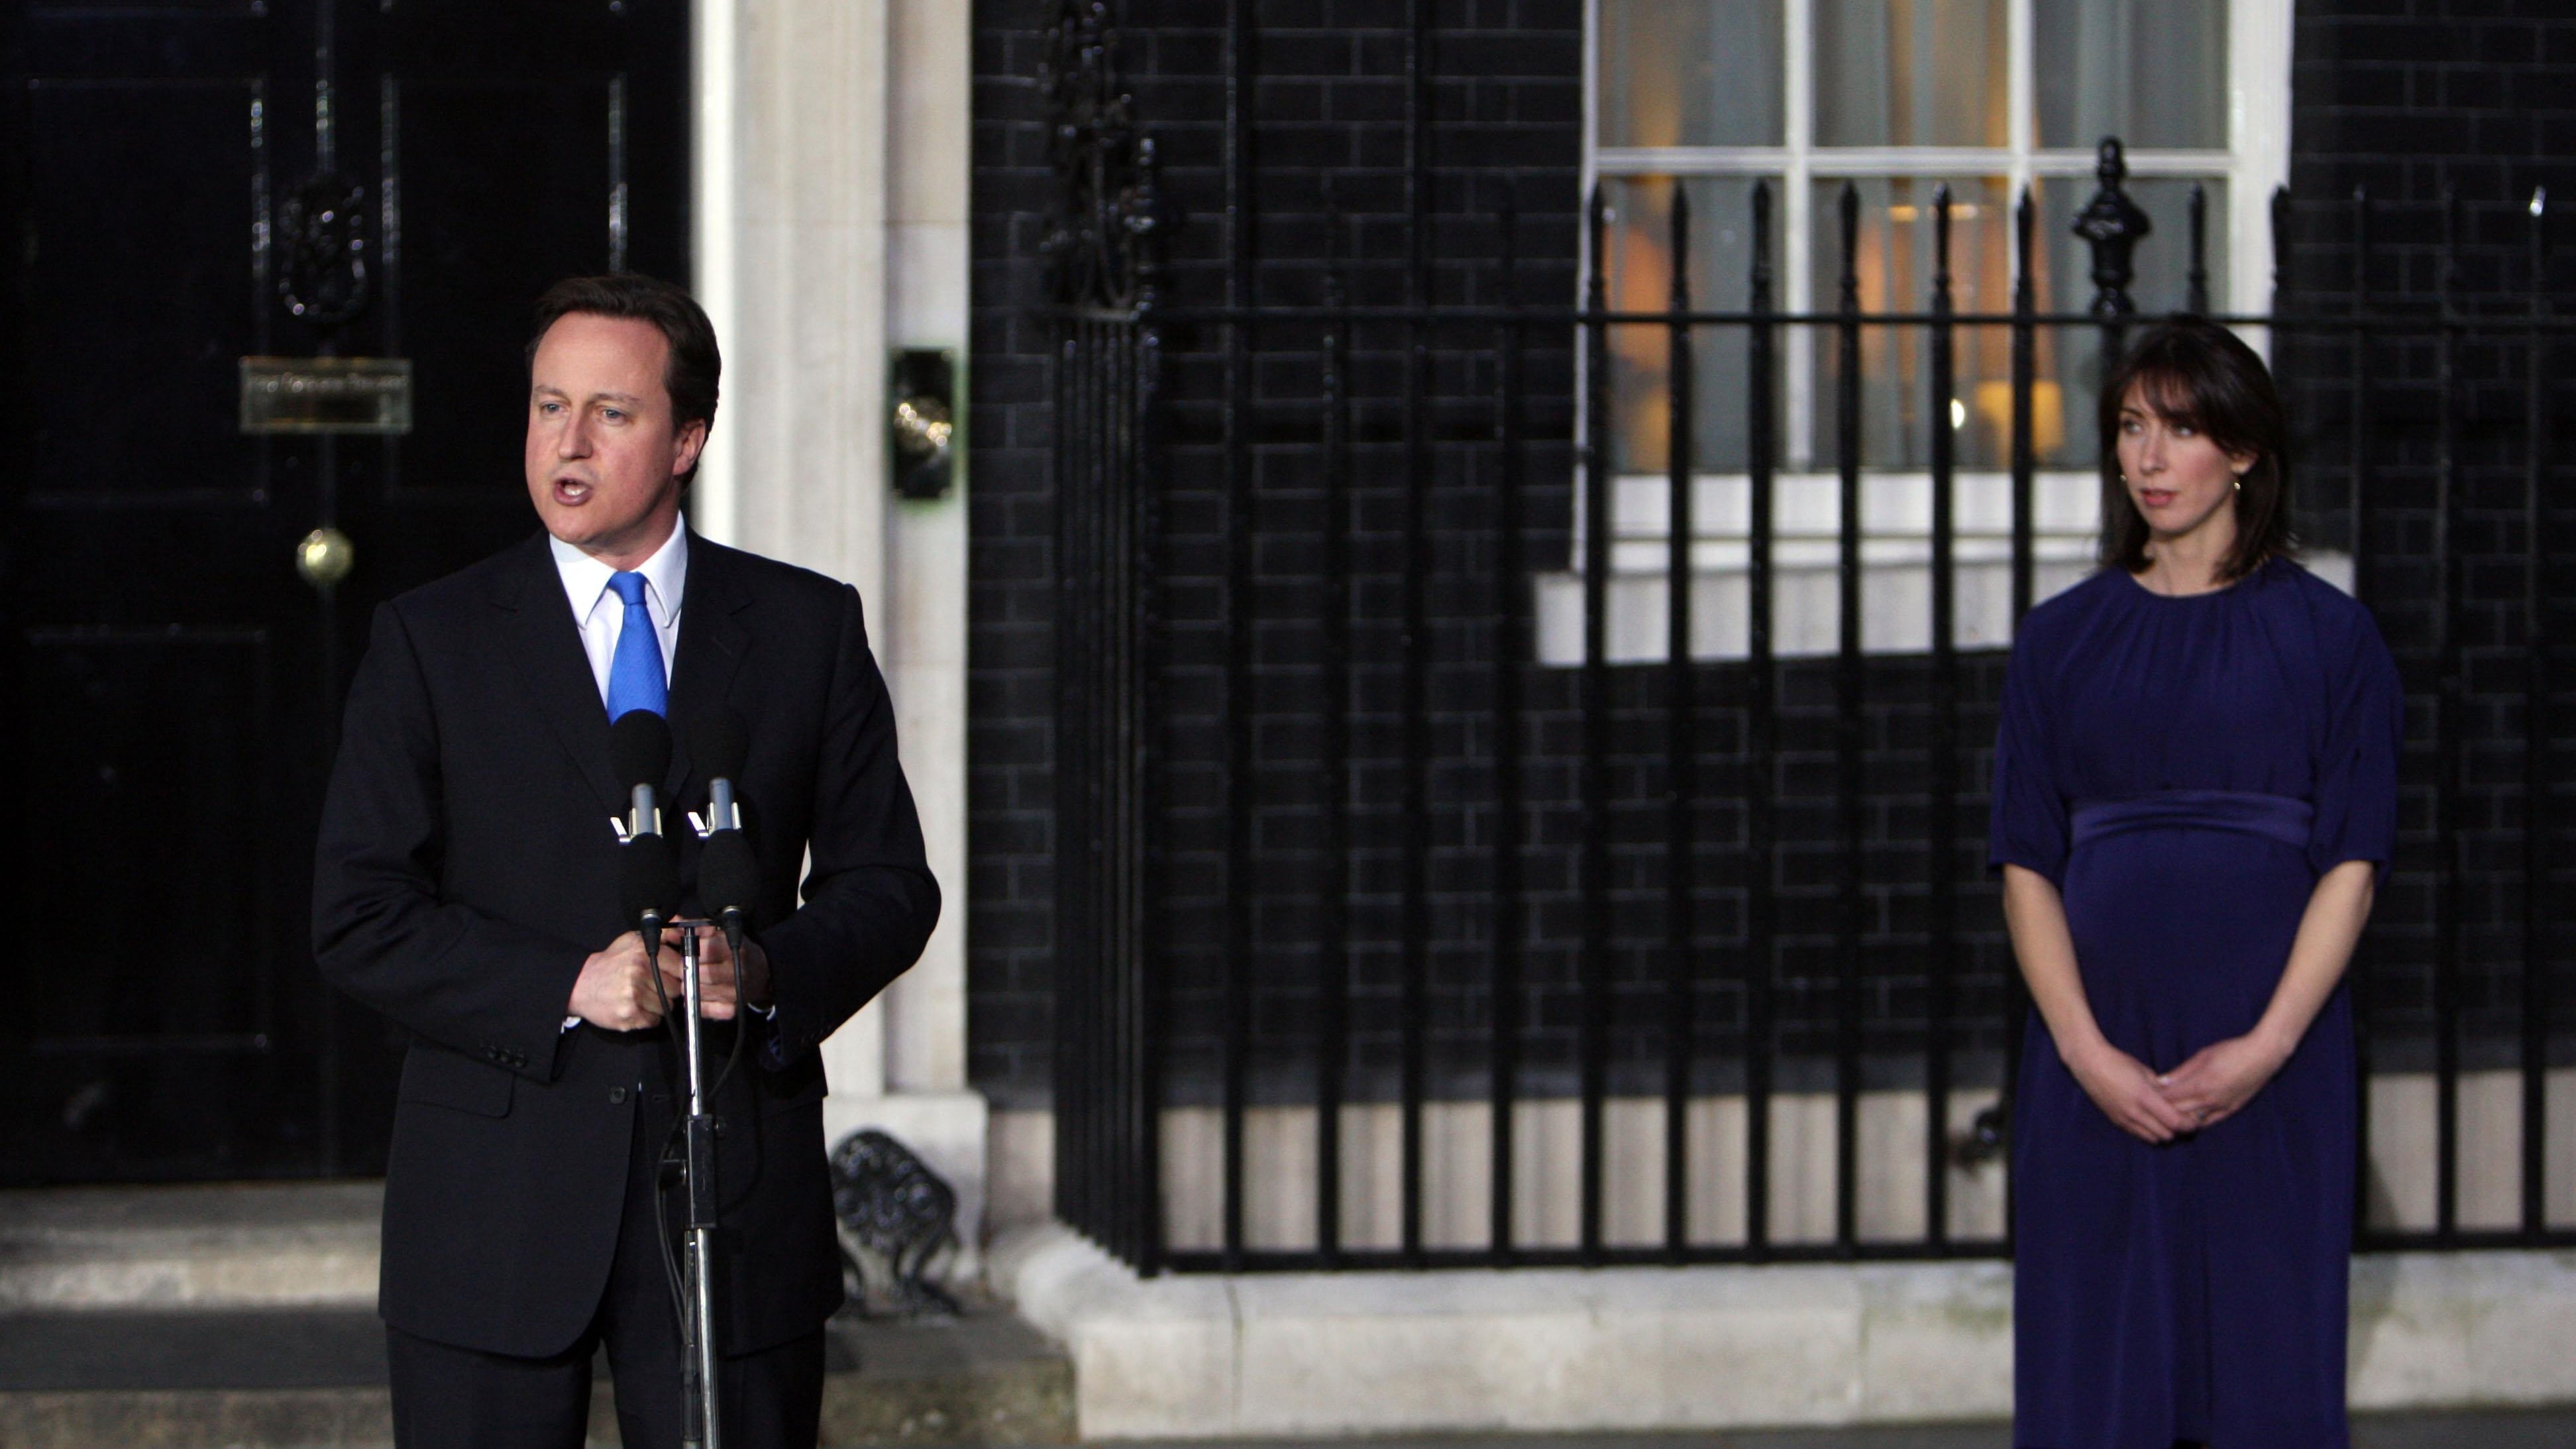 David Cameron, watched by his wife Samantha, addresses the nation from the steps of No 10 for the first time as prime minister